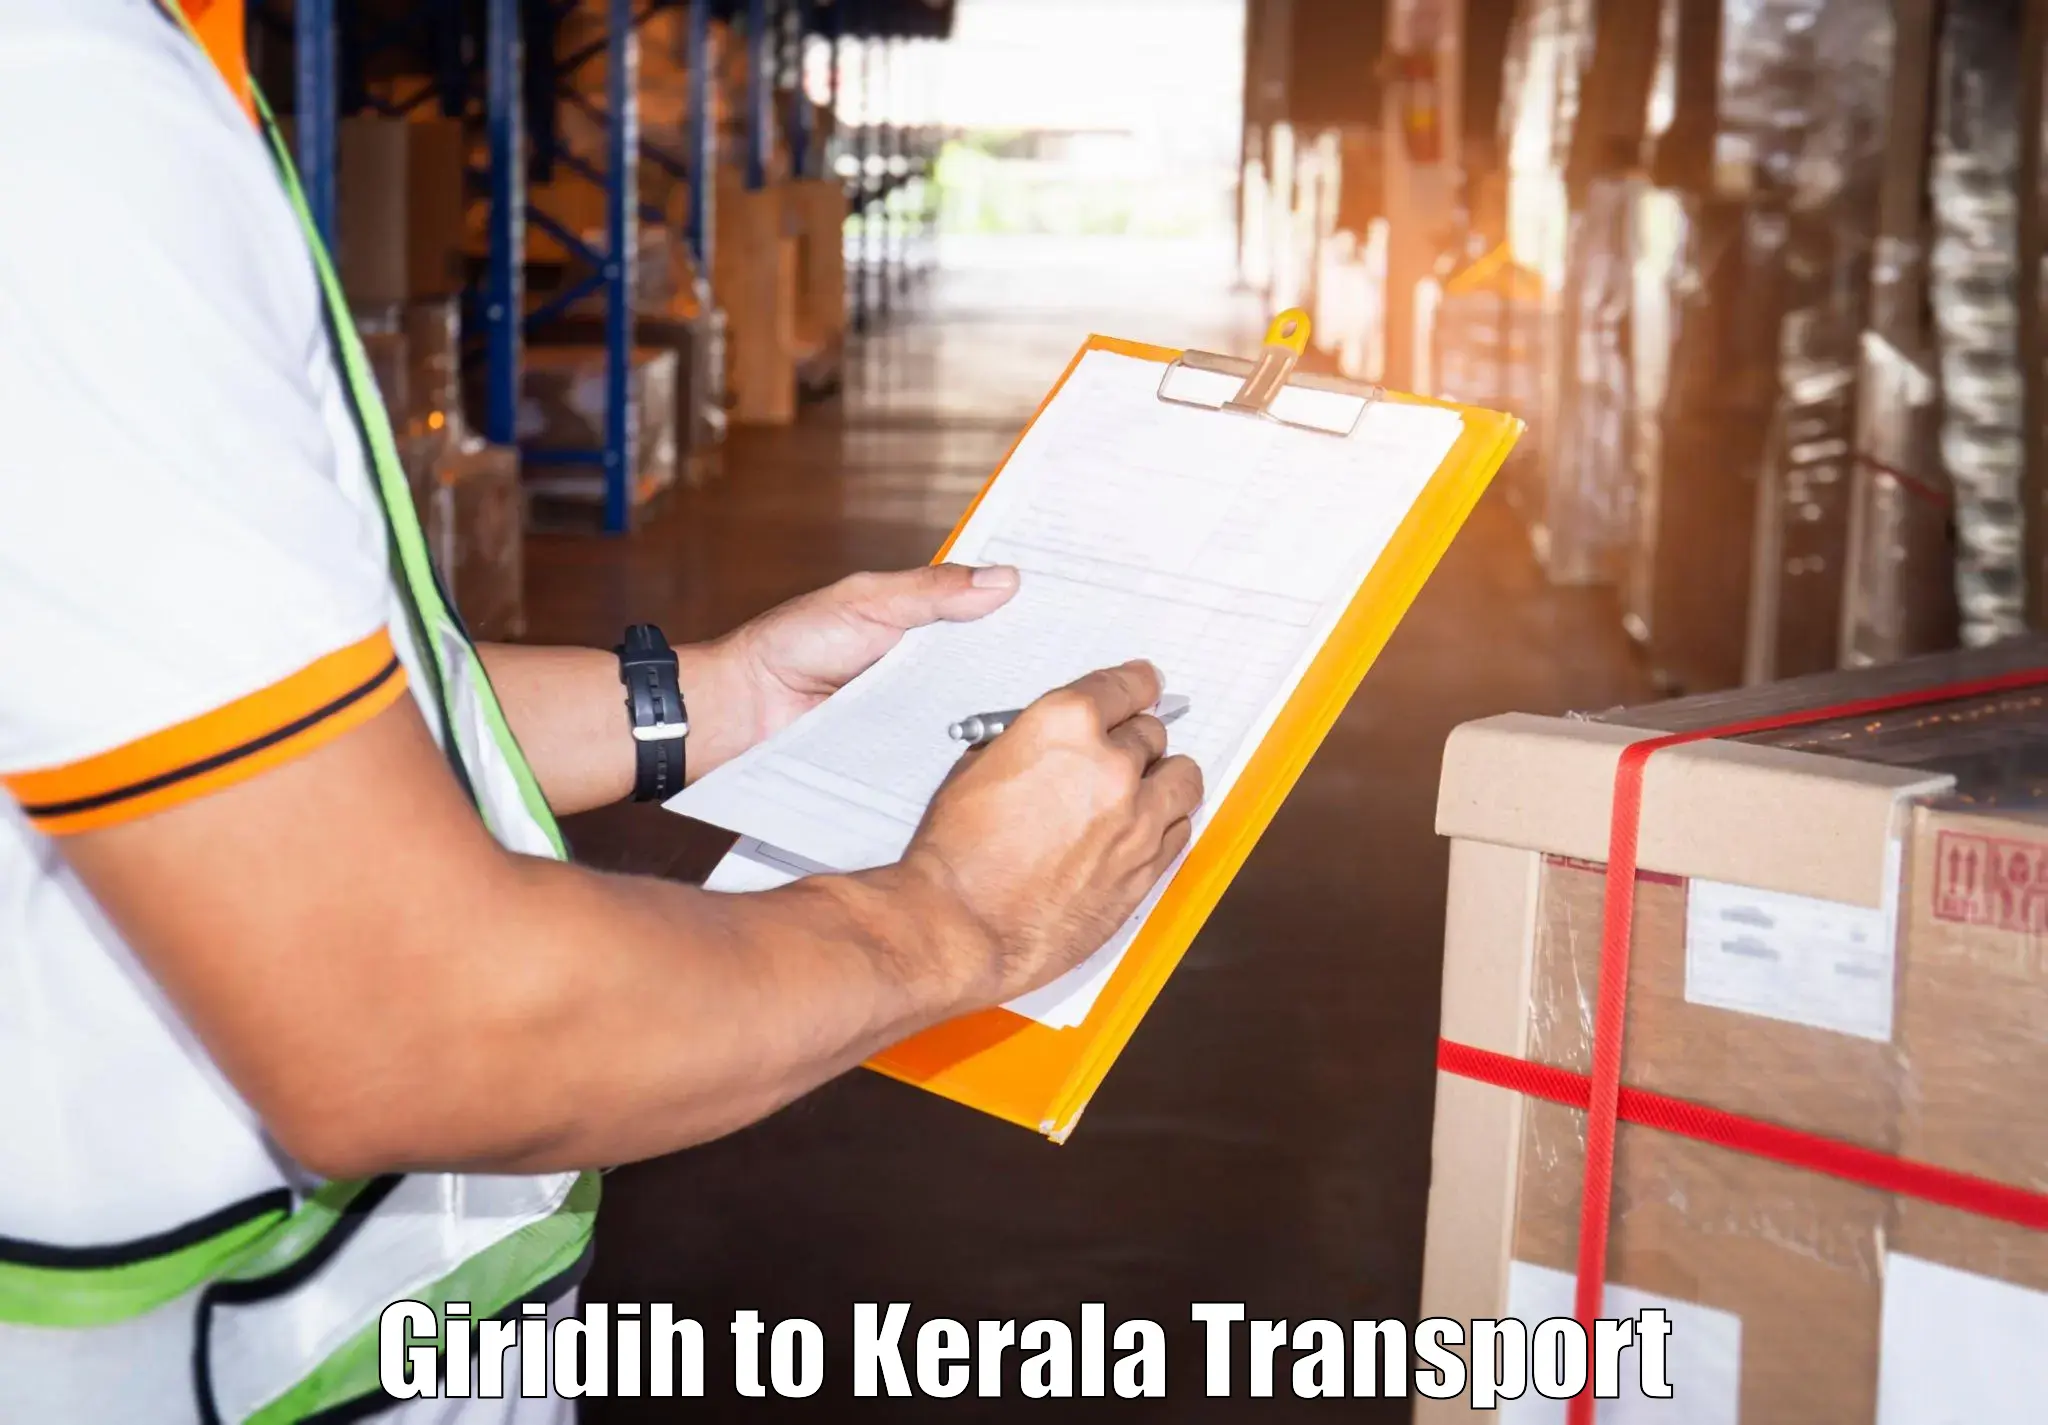 Container transport service Giridih to Wayanad